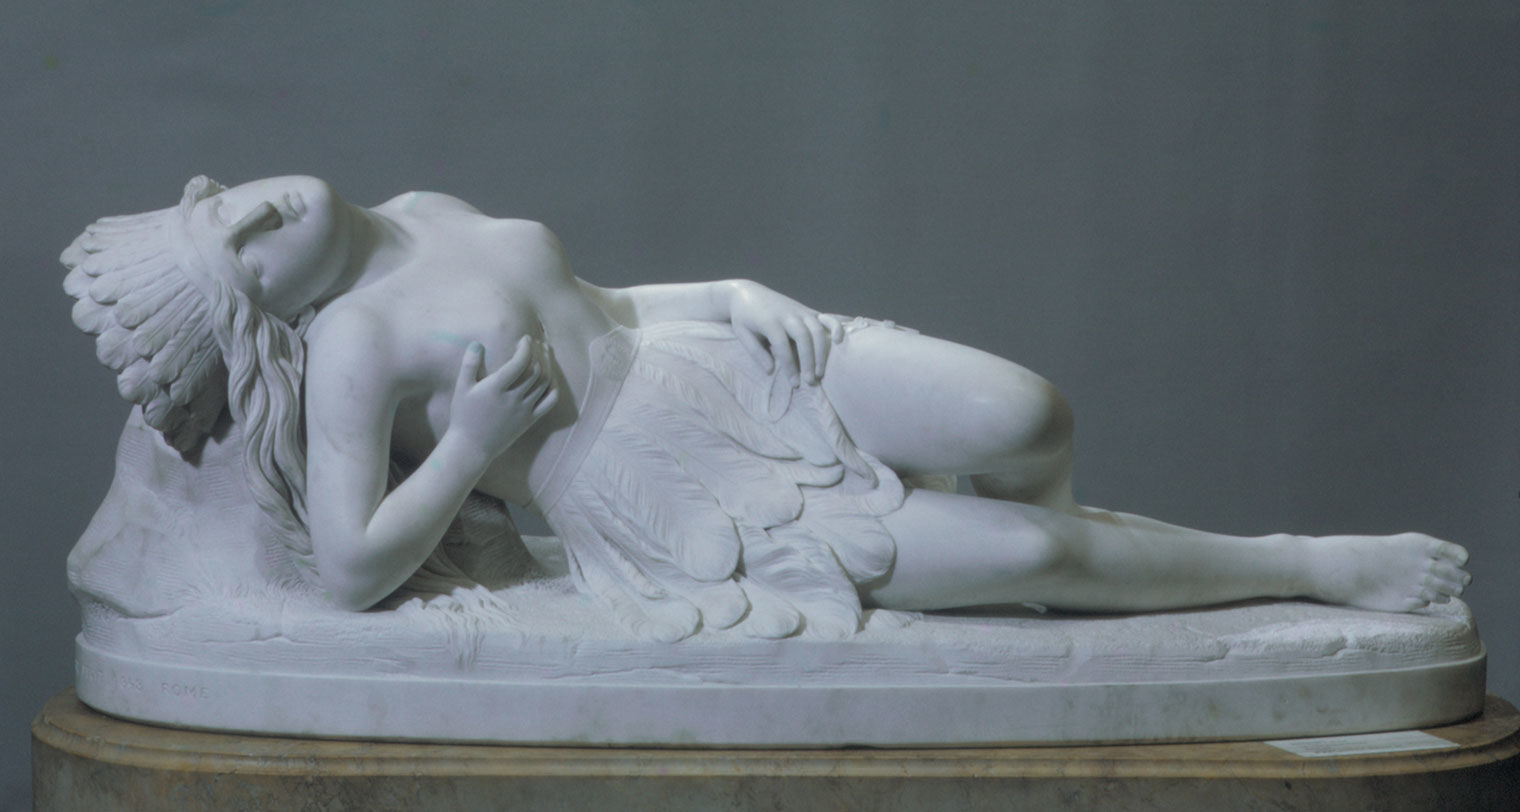 A white marble sculpture of a young, bare-chested woman with a headdress, who rests as if dying